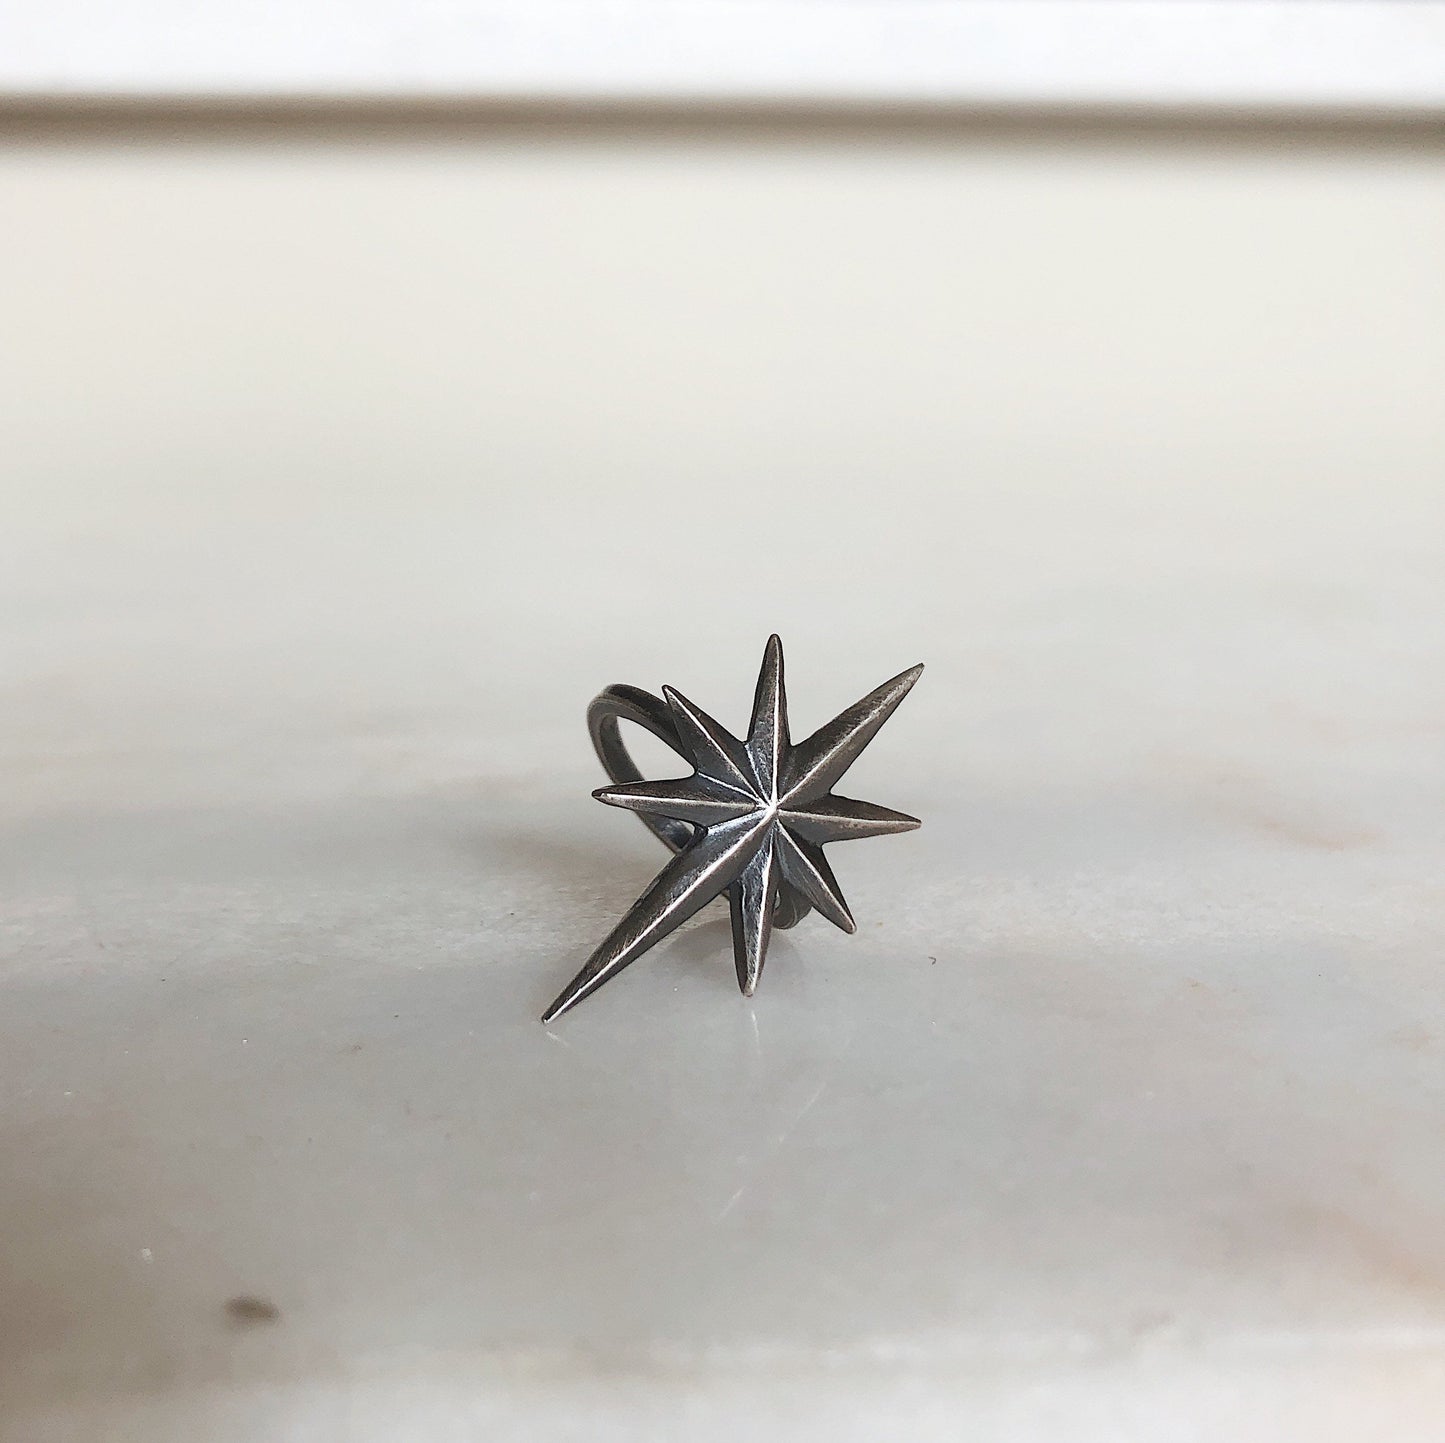 The North Star // Large // Ring